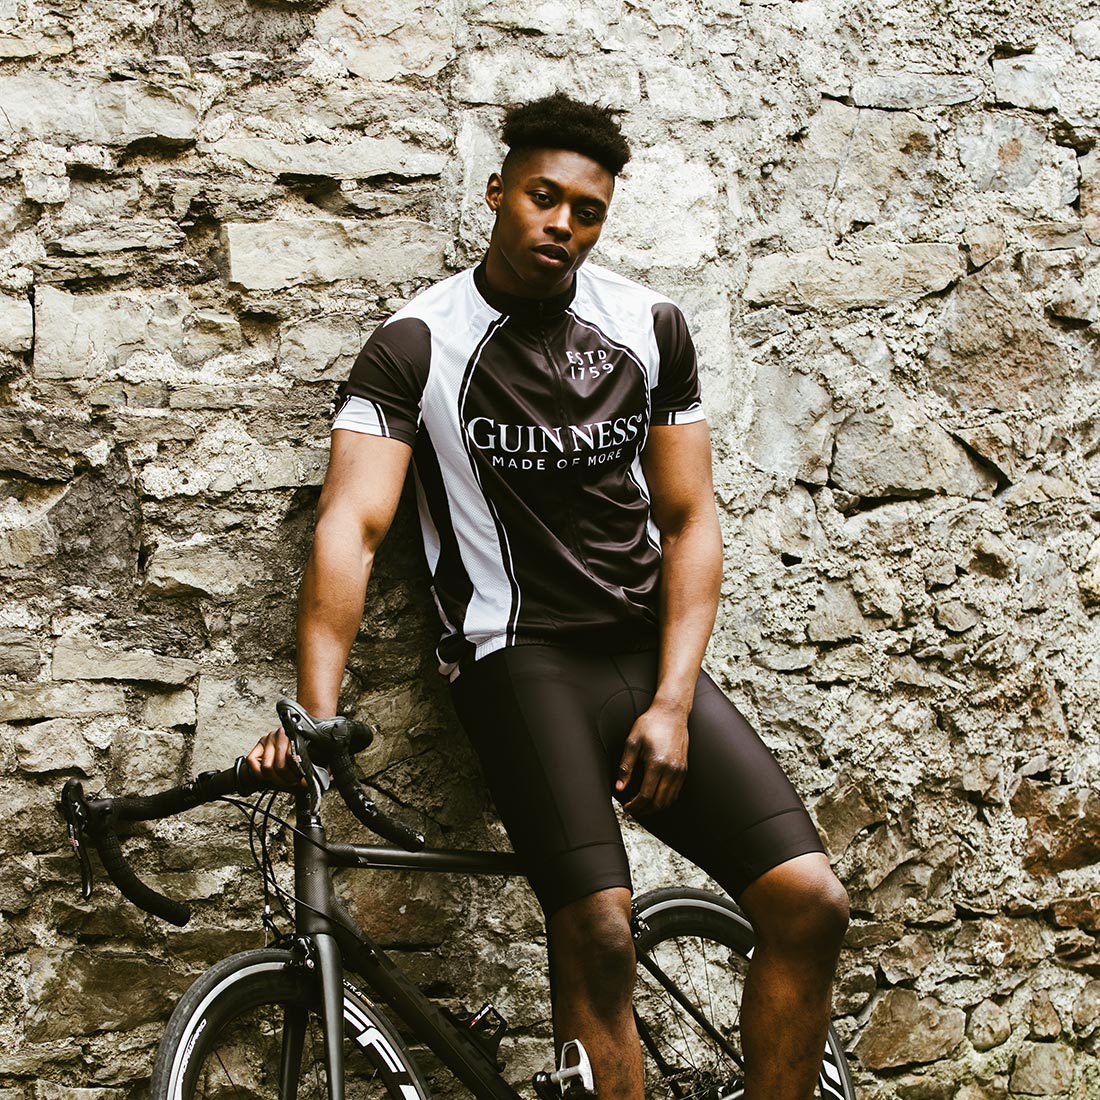 A man wearing a Guinness Performance Cycling Jersey leans against a stone wall with a bicycle.